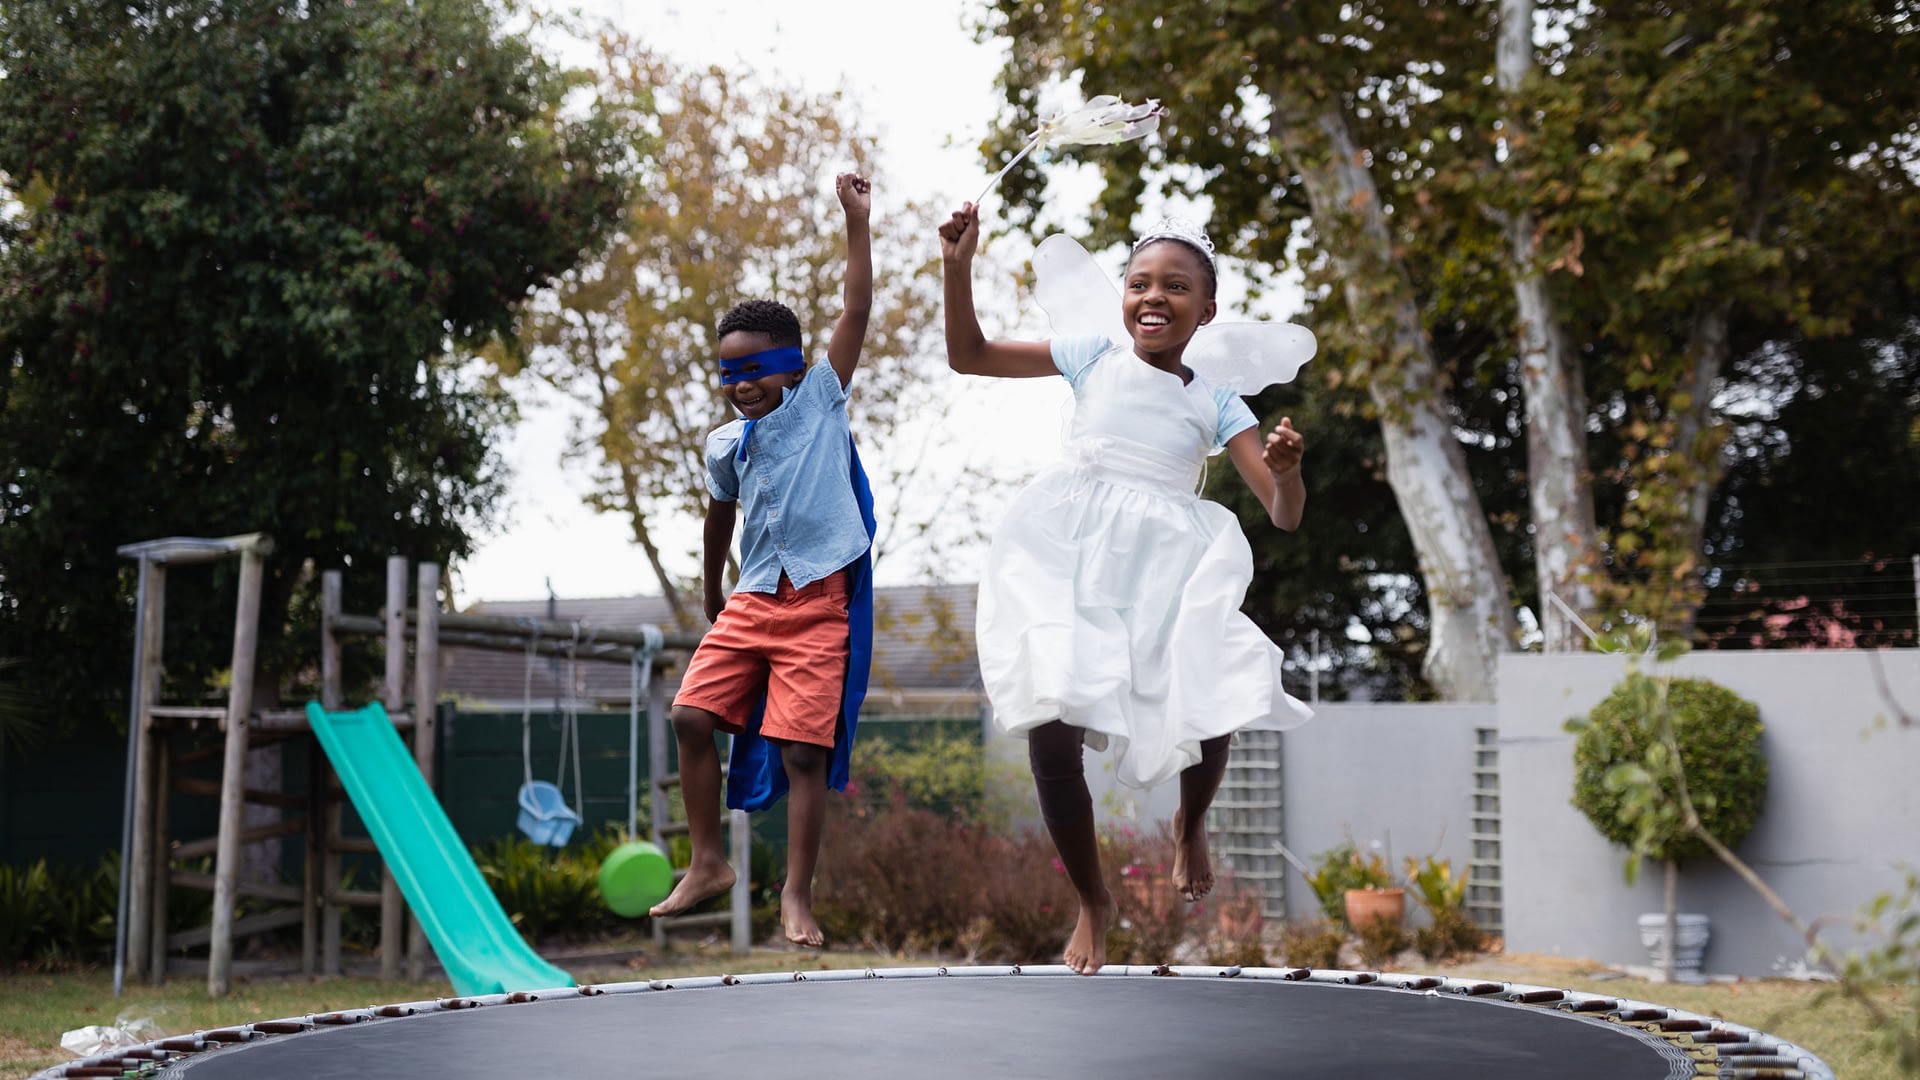 Kids jumping on a trampoline in the backyard of a residence.